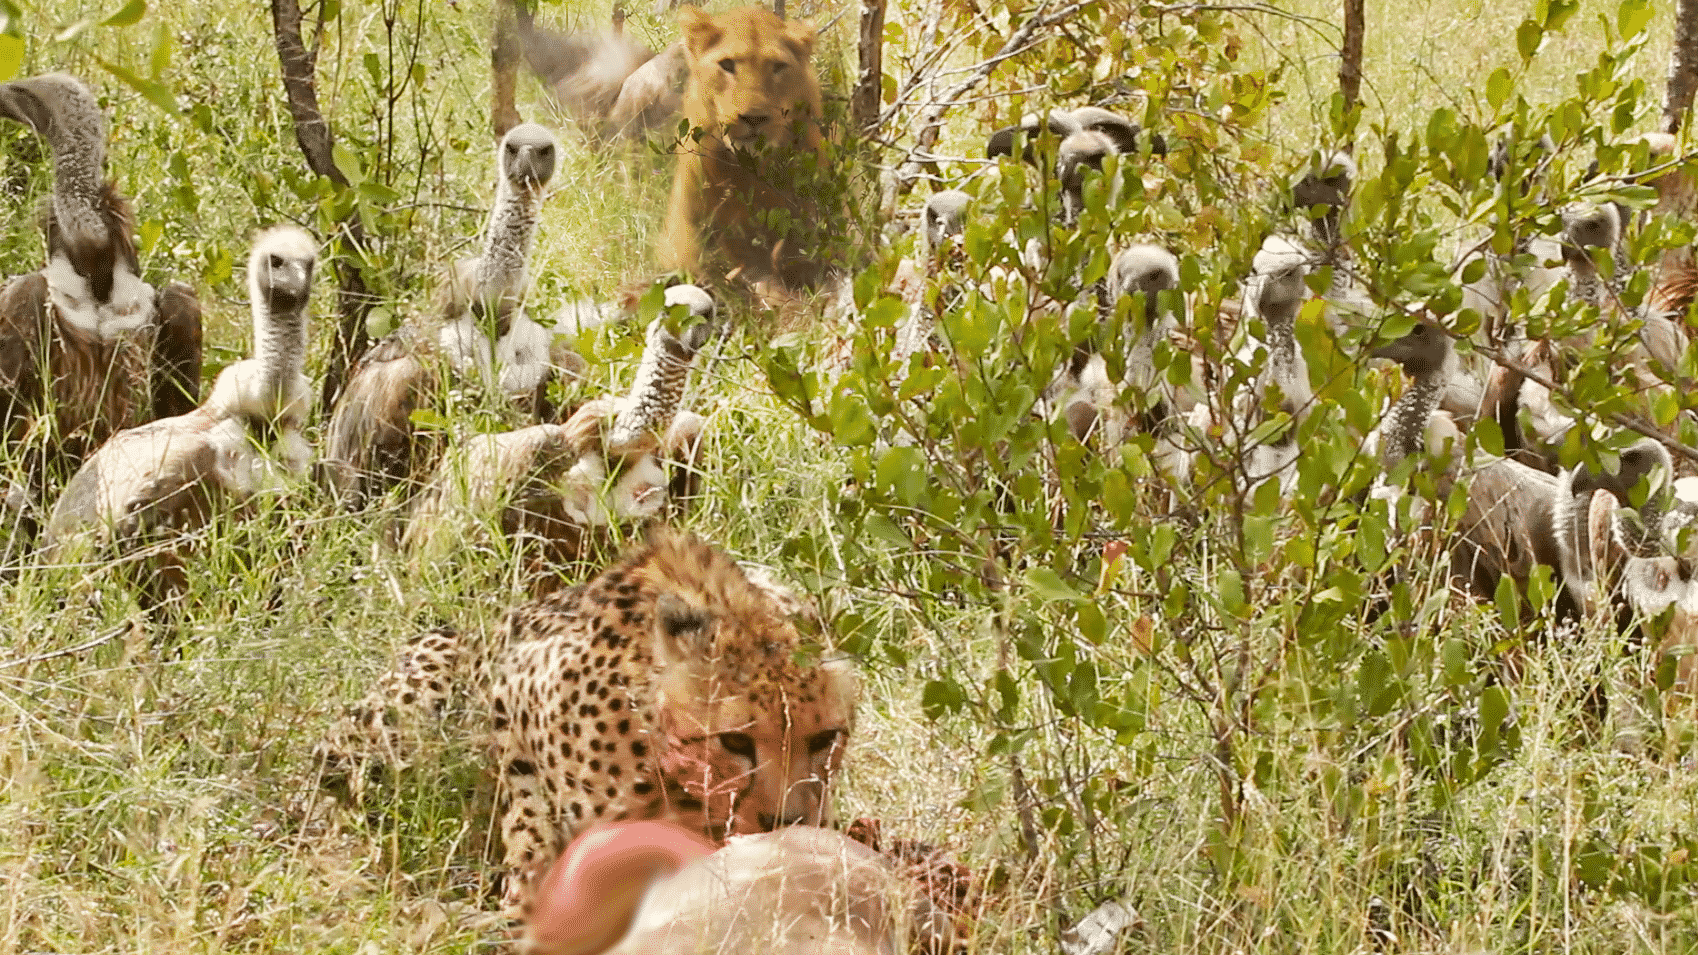 Lion Steals from Vultures that Stole from Cheetah